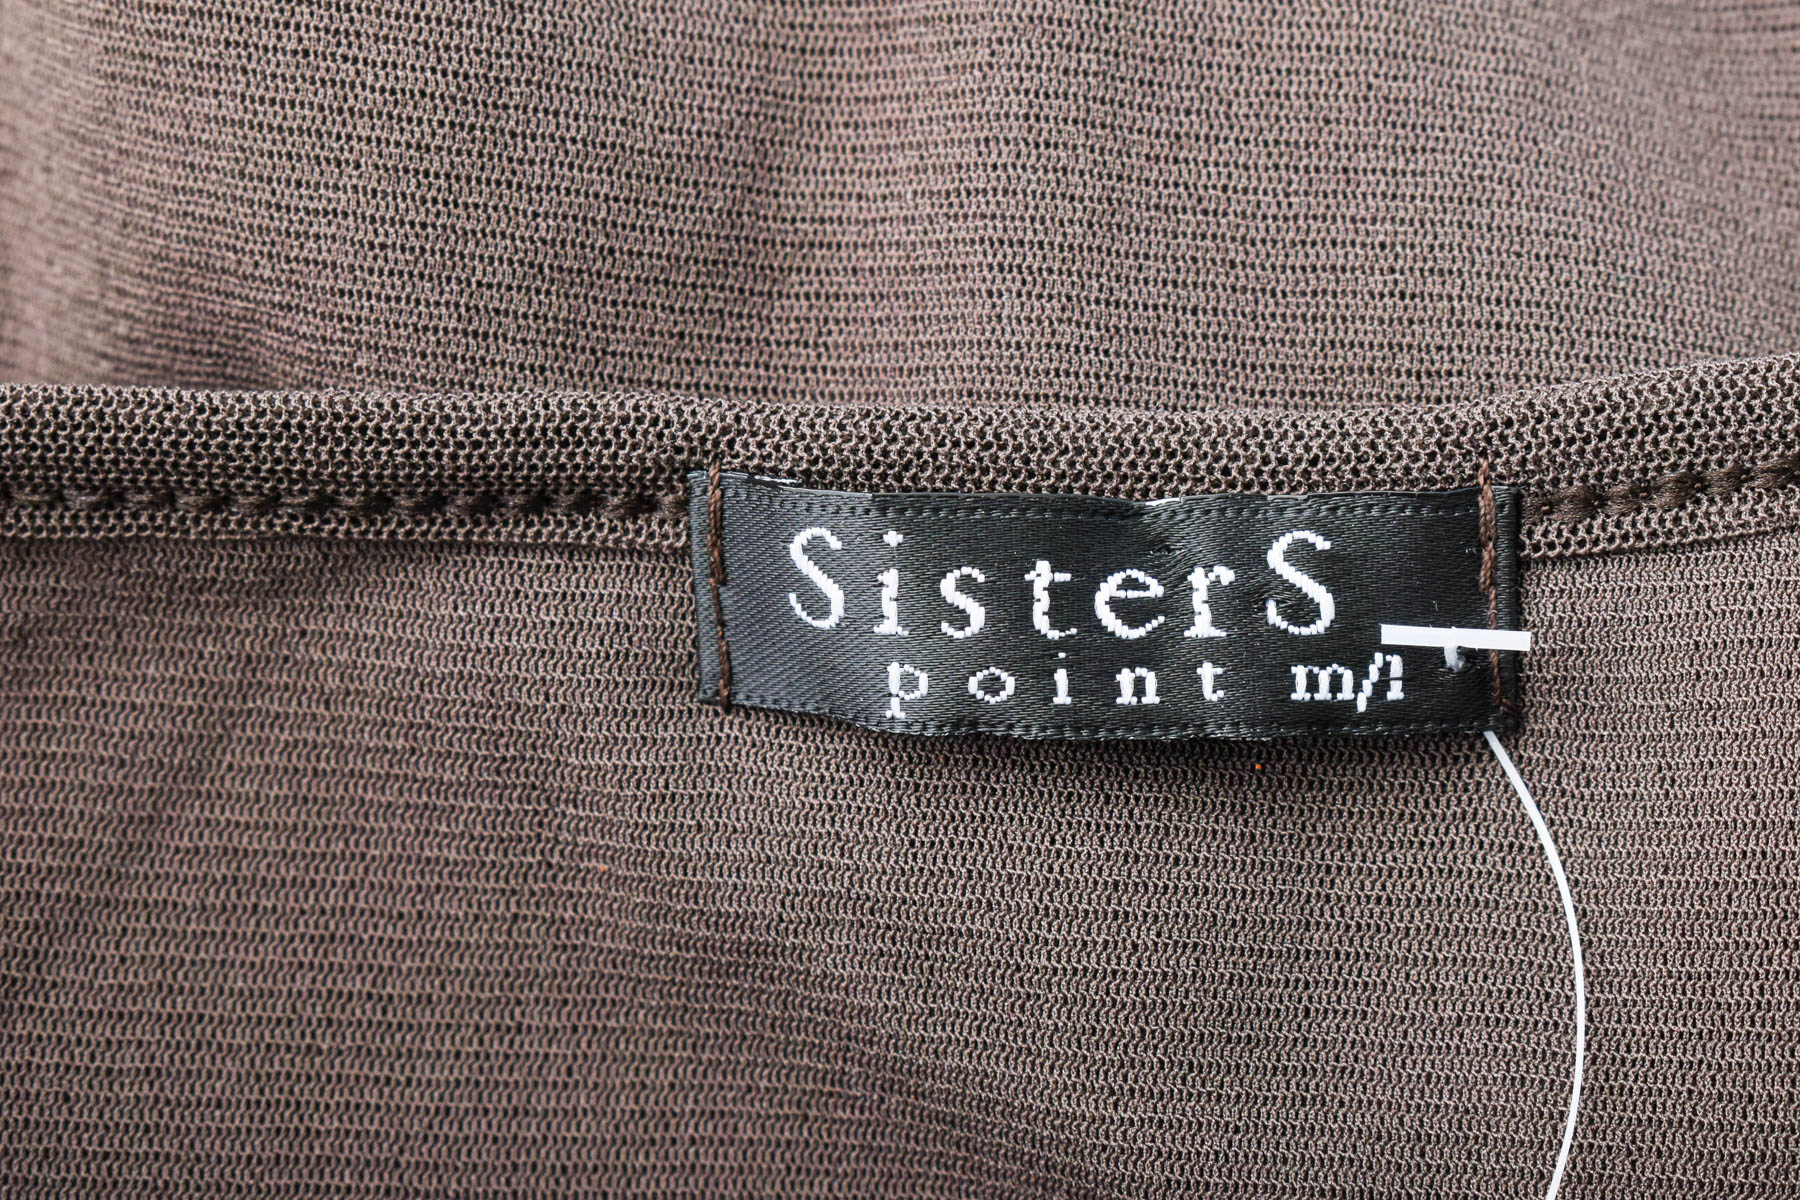 Women's top - Sisters Point - 2